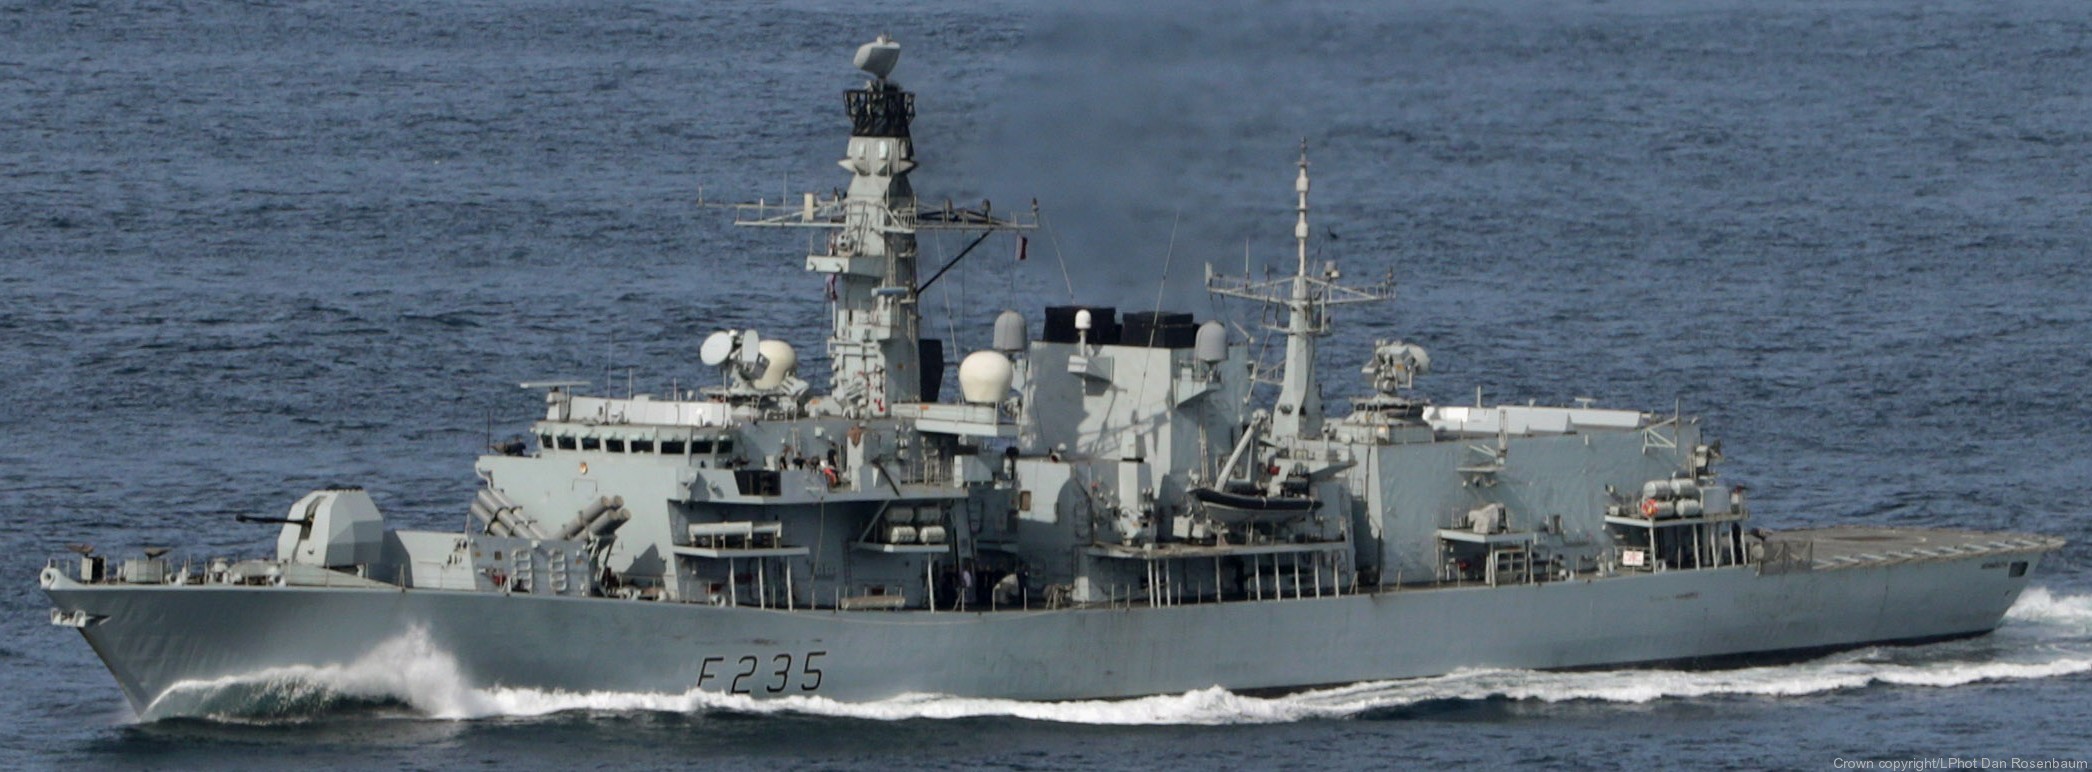 f-235 hms monmouth type 23 duke class guided missile frigate ffg royal navy 28